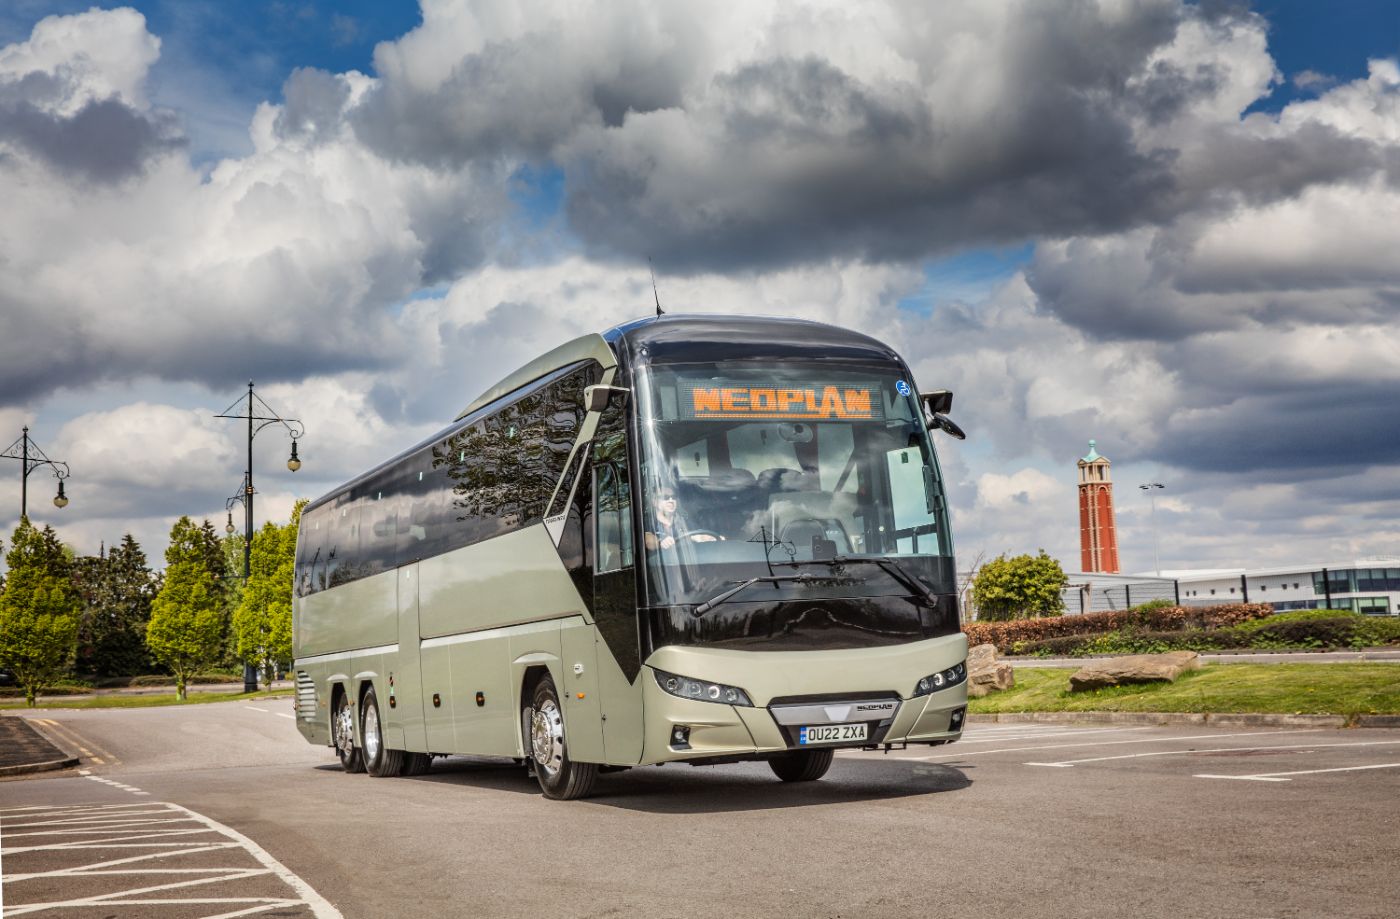 Neoplan Tourliner P20 tri-axle with MAN D26 510bhp engine and ZF TraXon automated gearbox